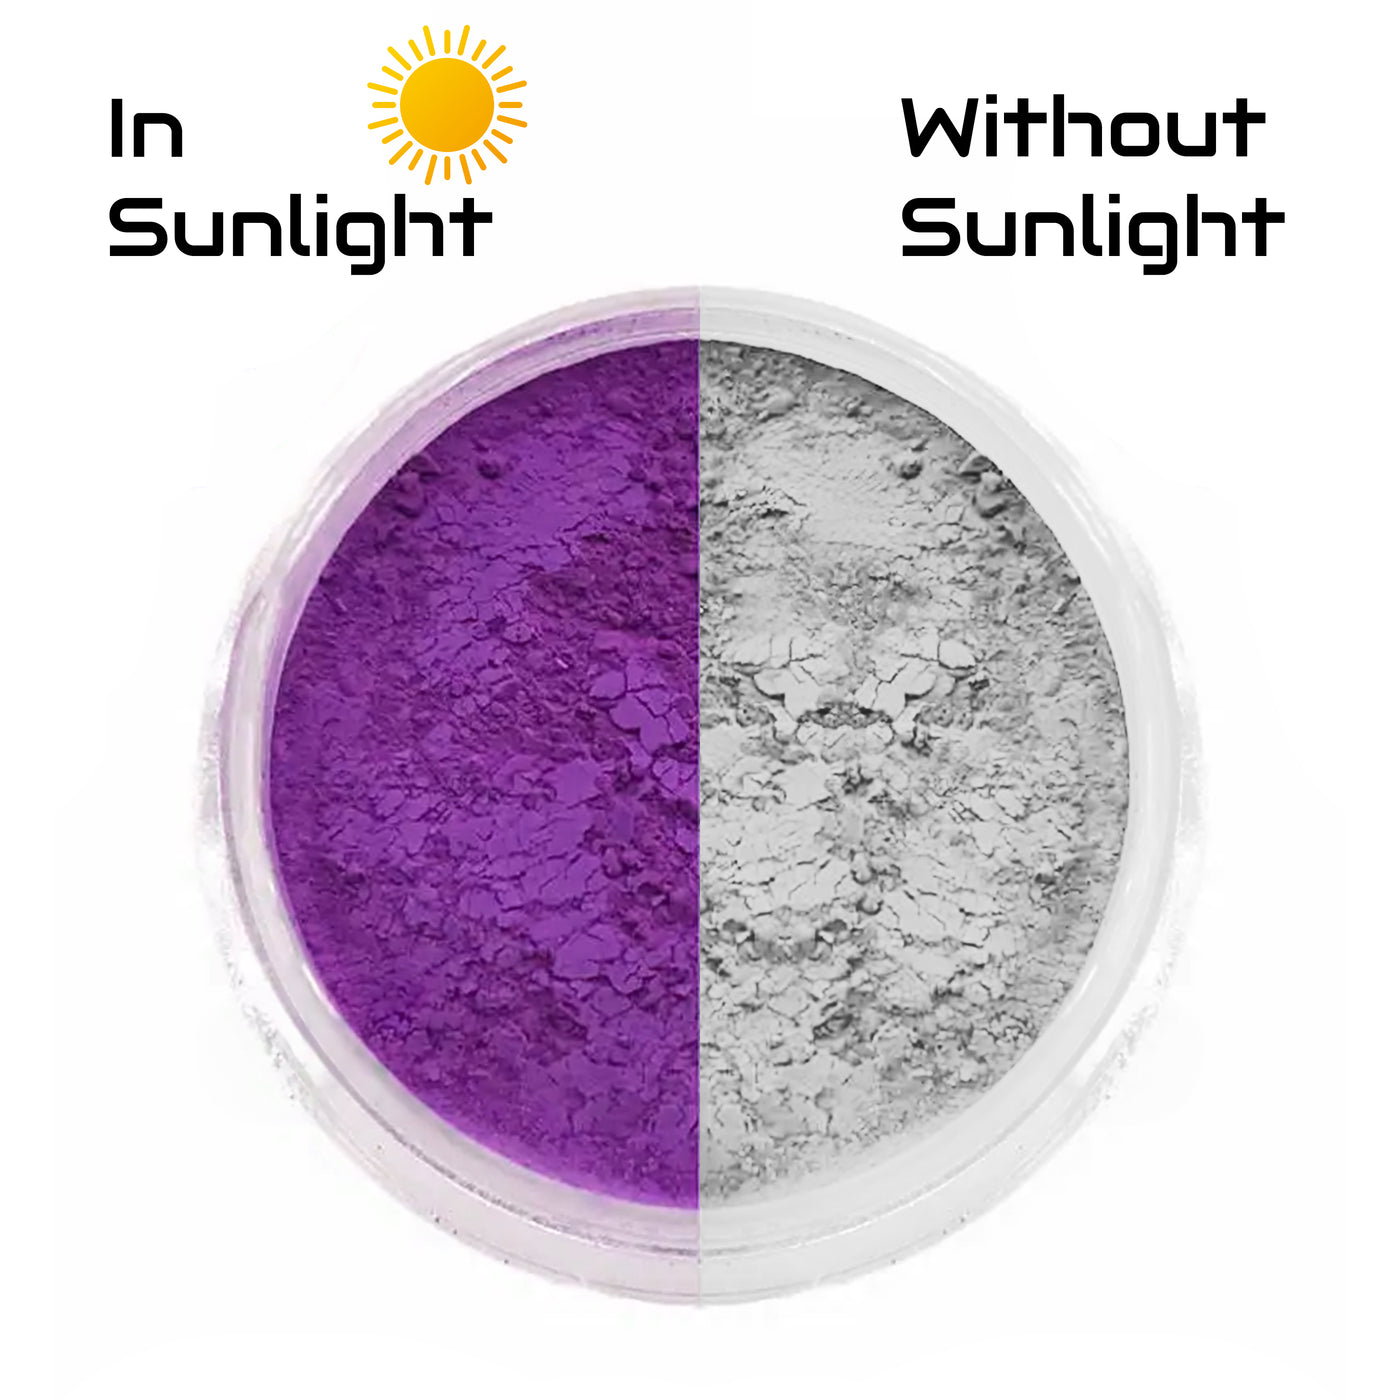 White to Purple - Photochromic Pigment Powder (Changes Color In Sunlight)